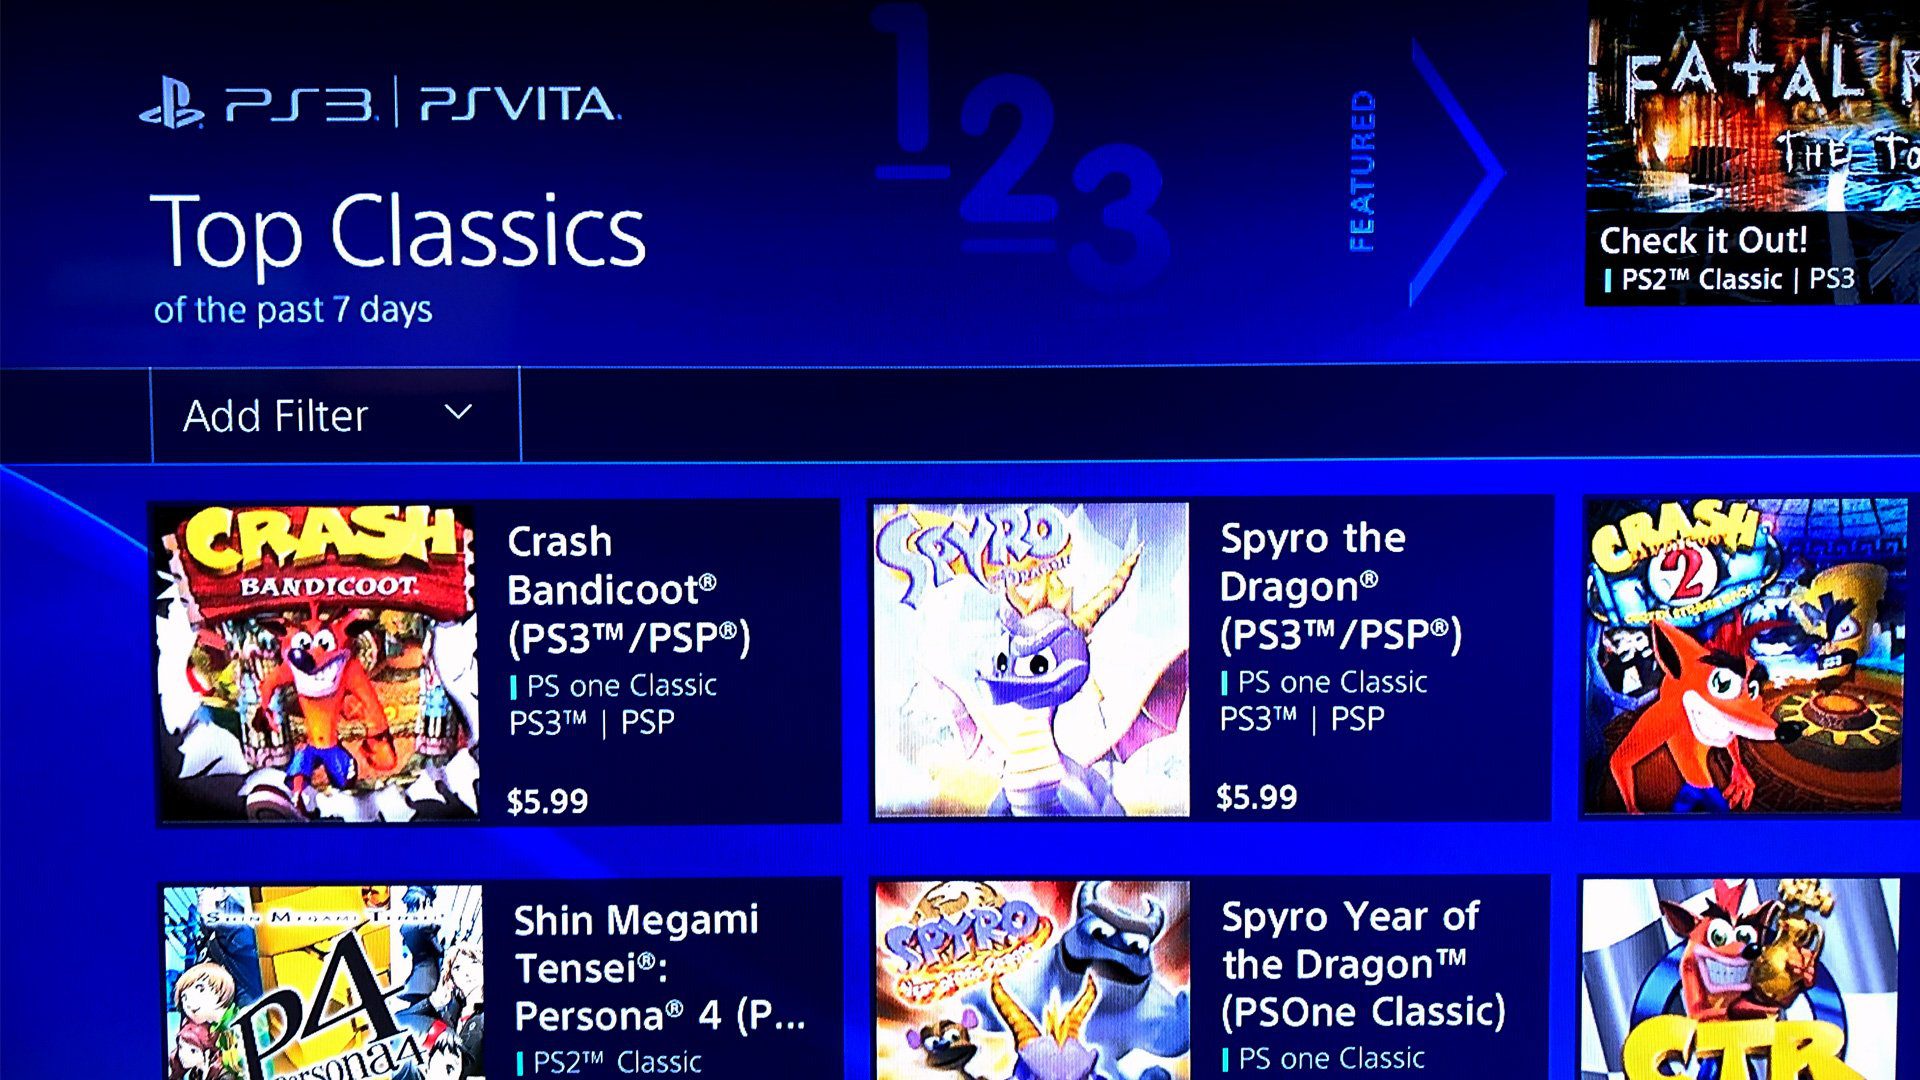 PS3 and PS Vita stores are dropping credit card and PayPal support soon